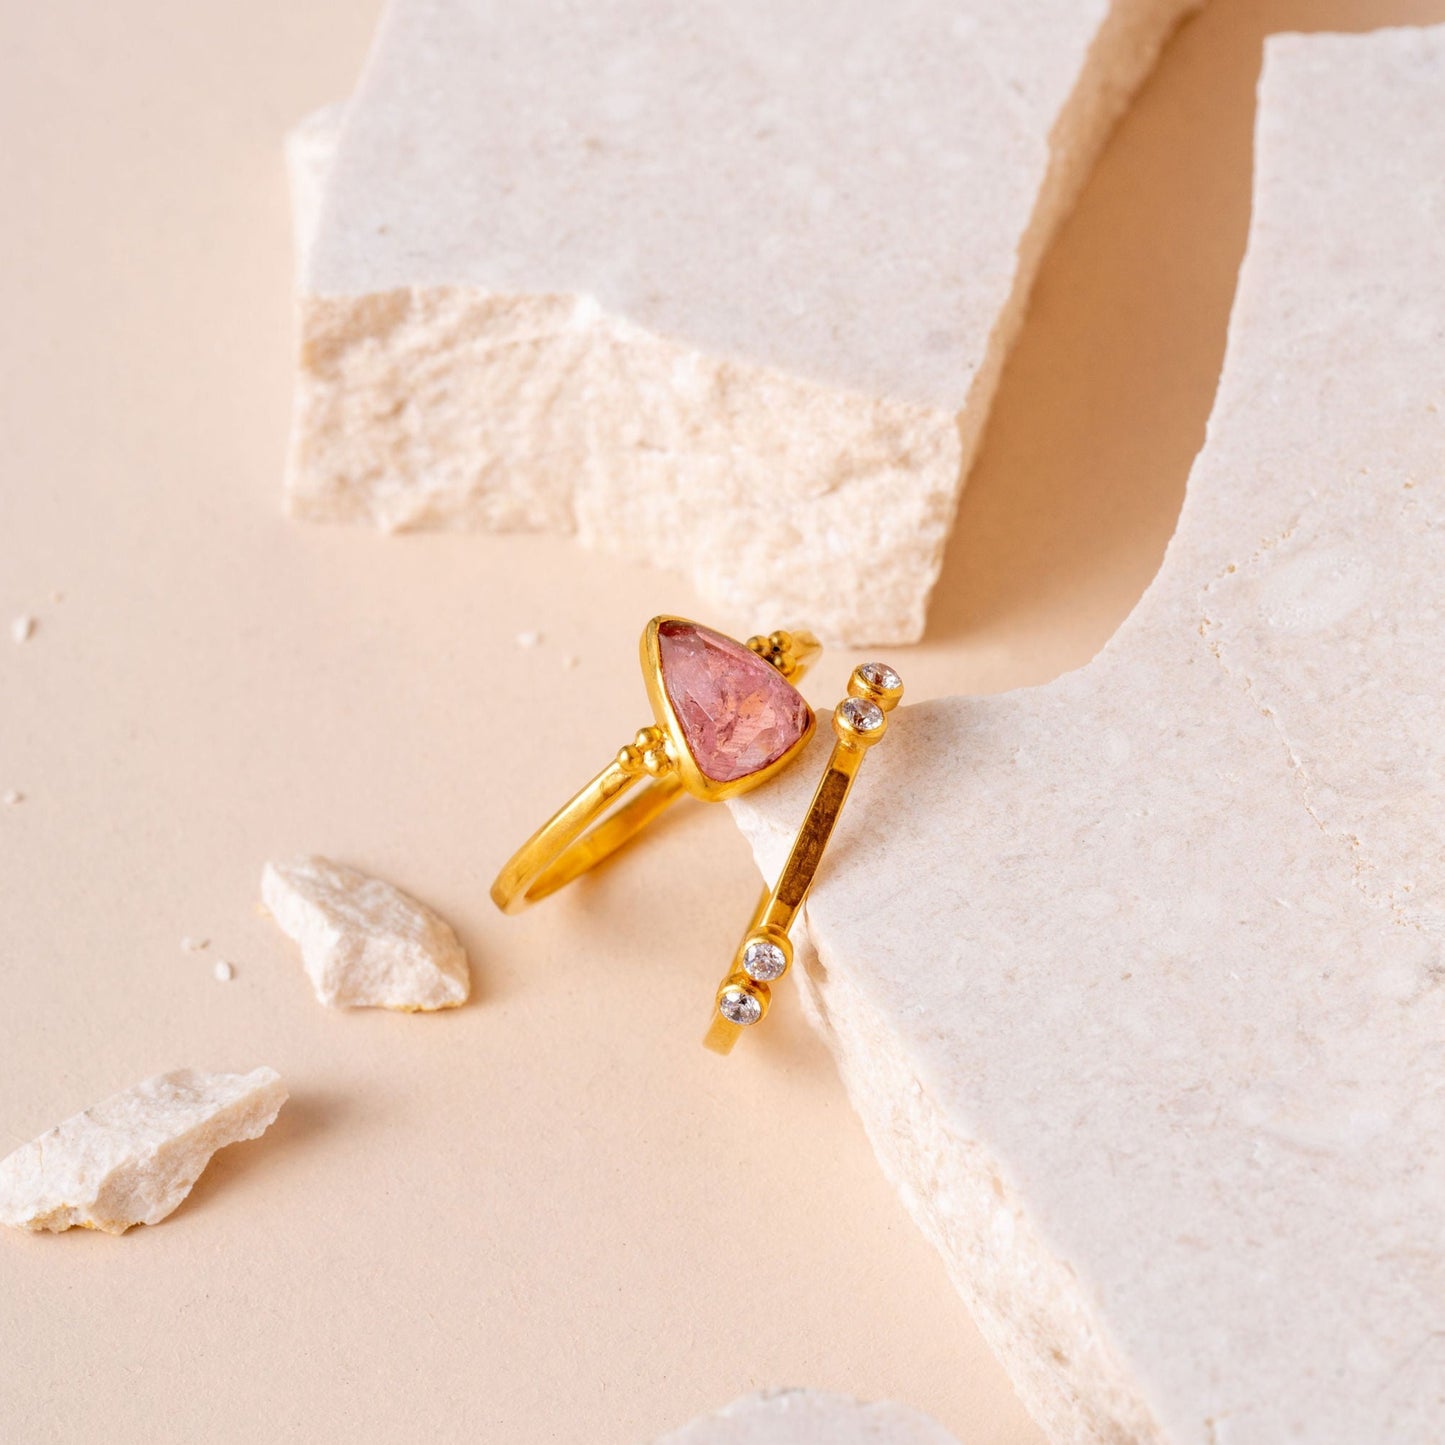 A rich gold coloured ring, expertly crafted to highlight a stunning pink tourmaline gem and detailed granulation.